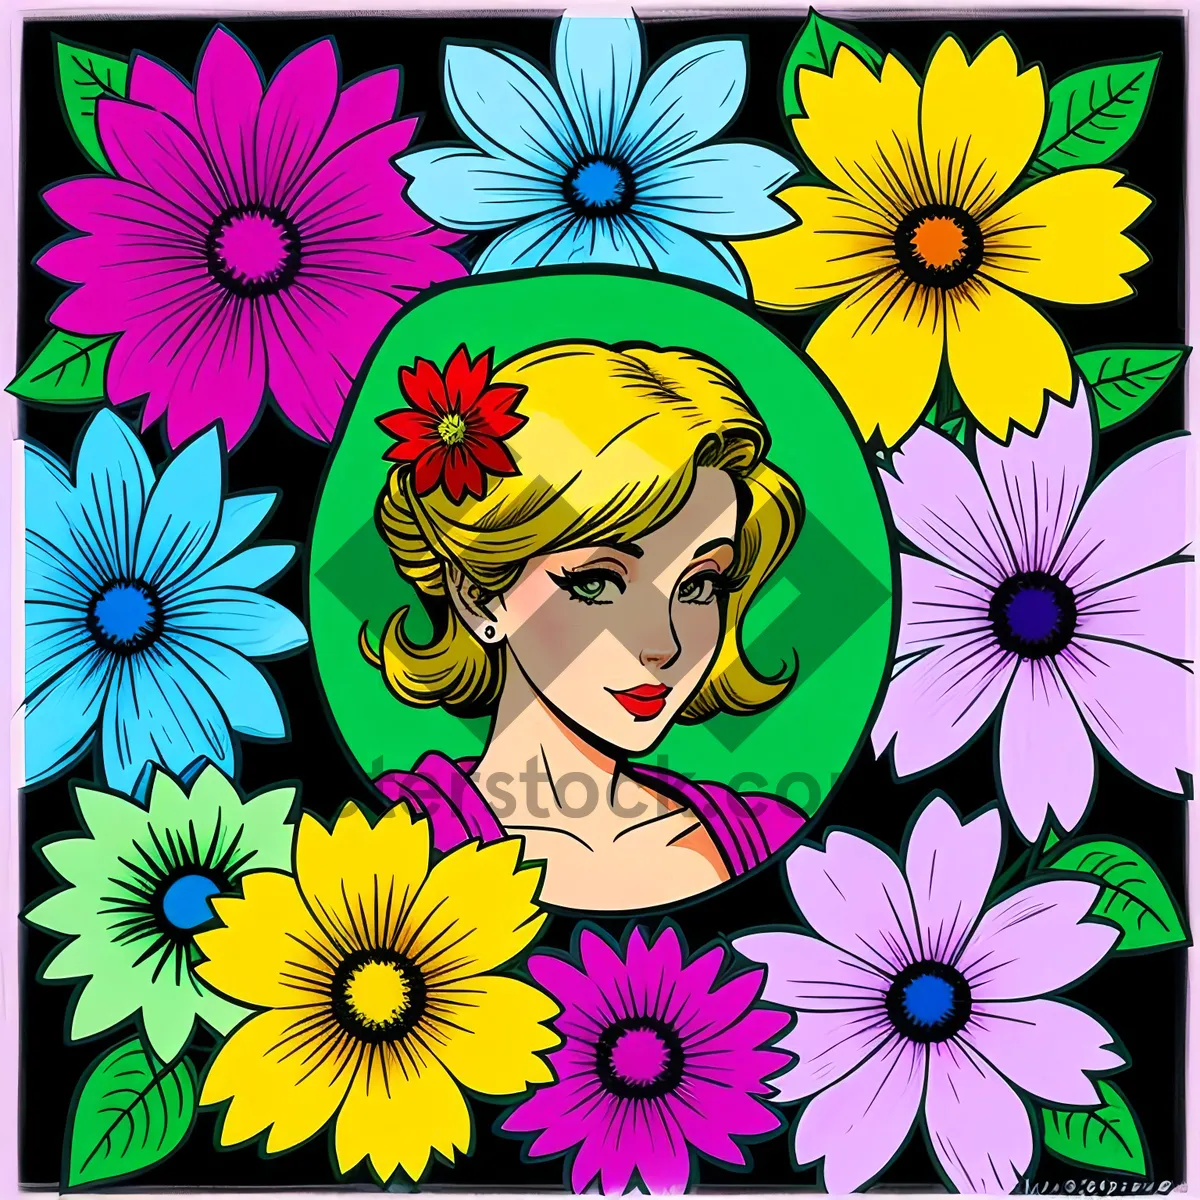 Picture of Floral Reformer: Colorful Retro Flower Graphic Art Decoration.